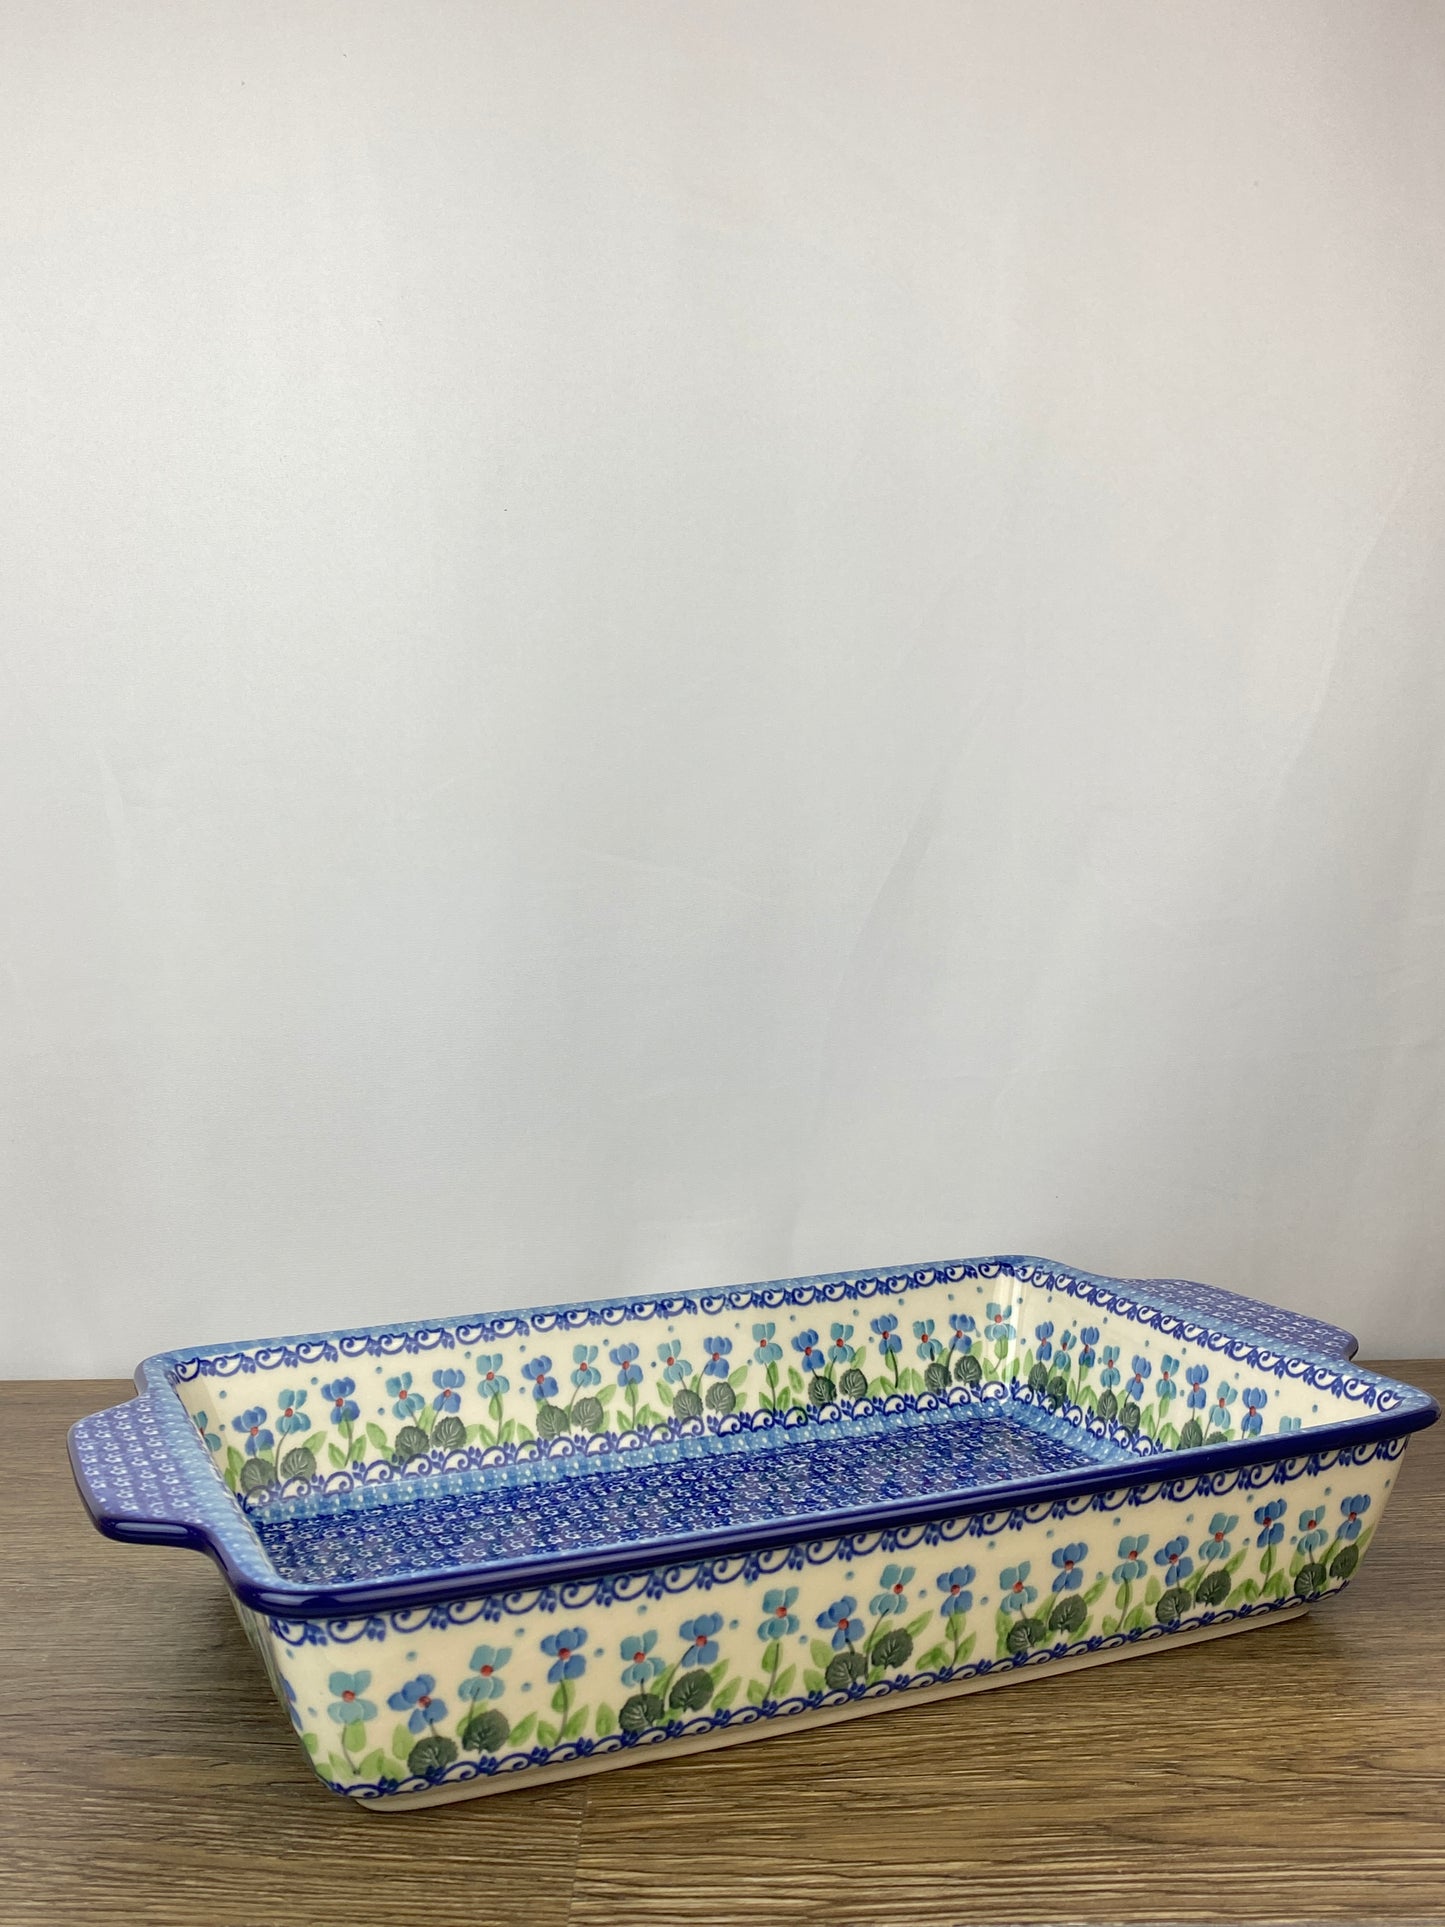 Large Rectangular Baker with Handles - Shape A56 - Pattern 2668